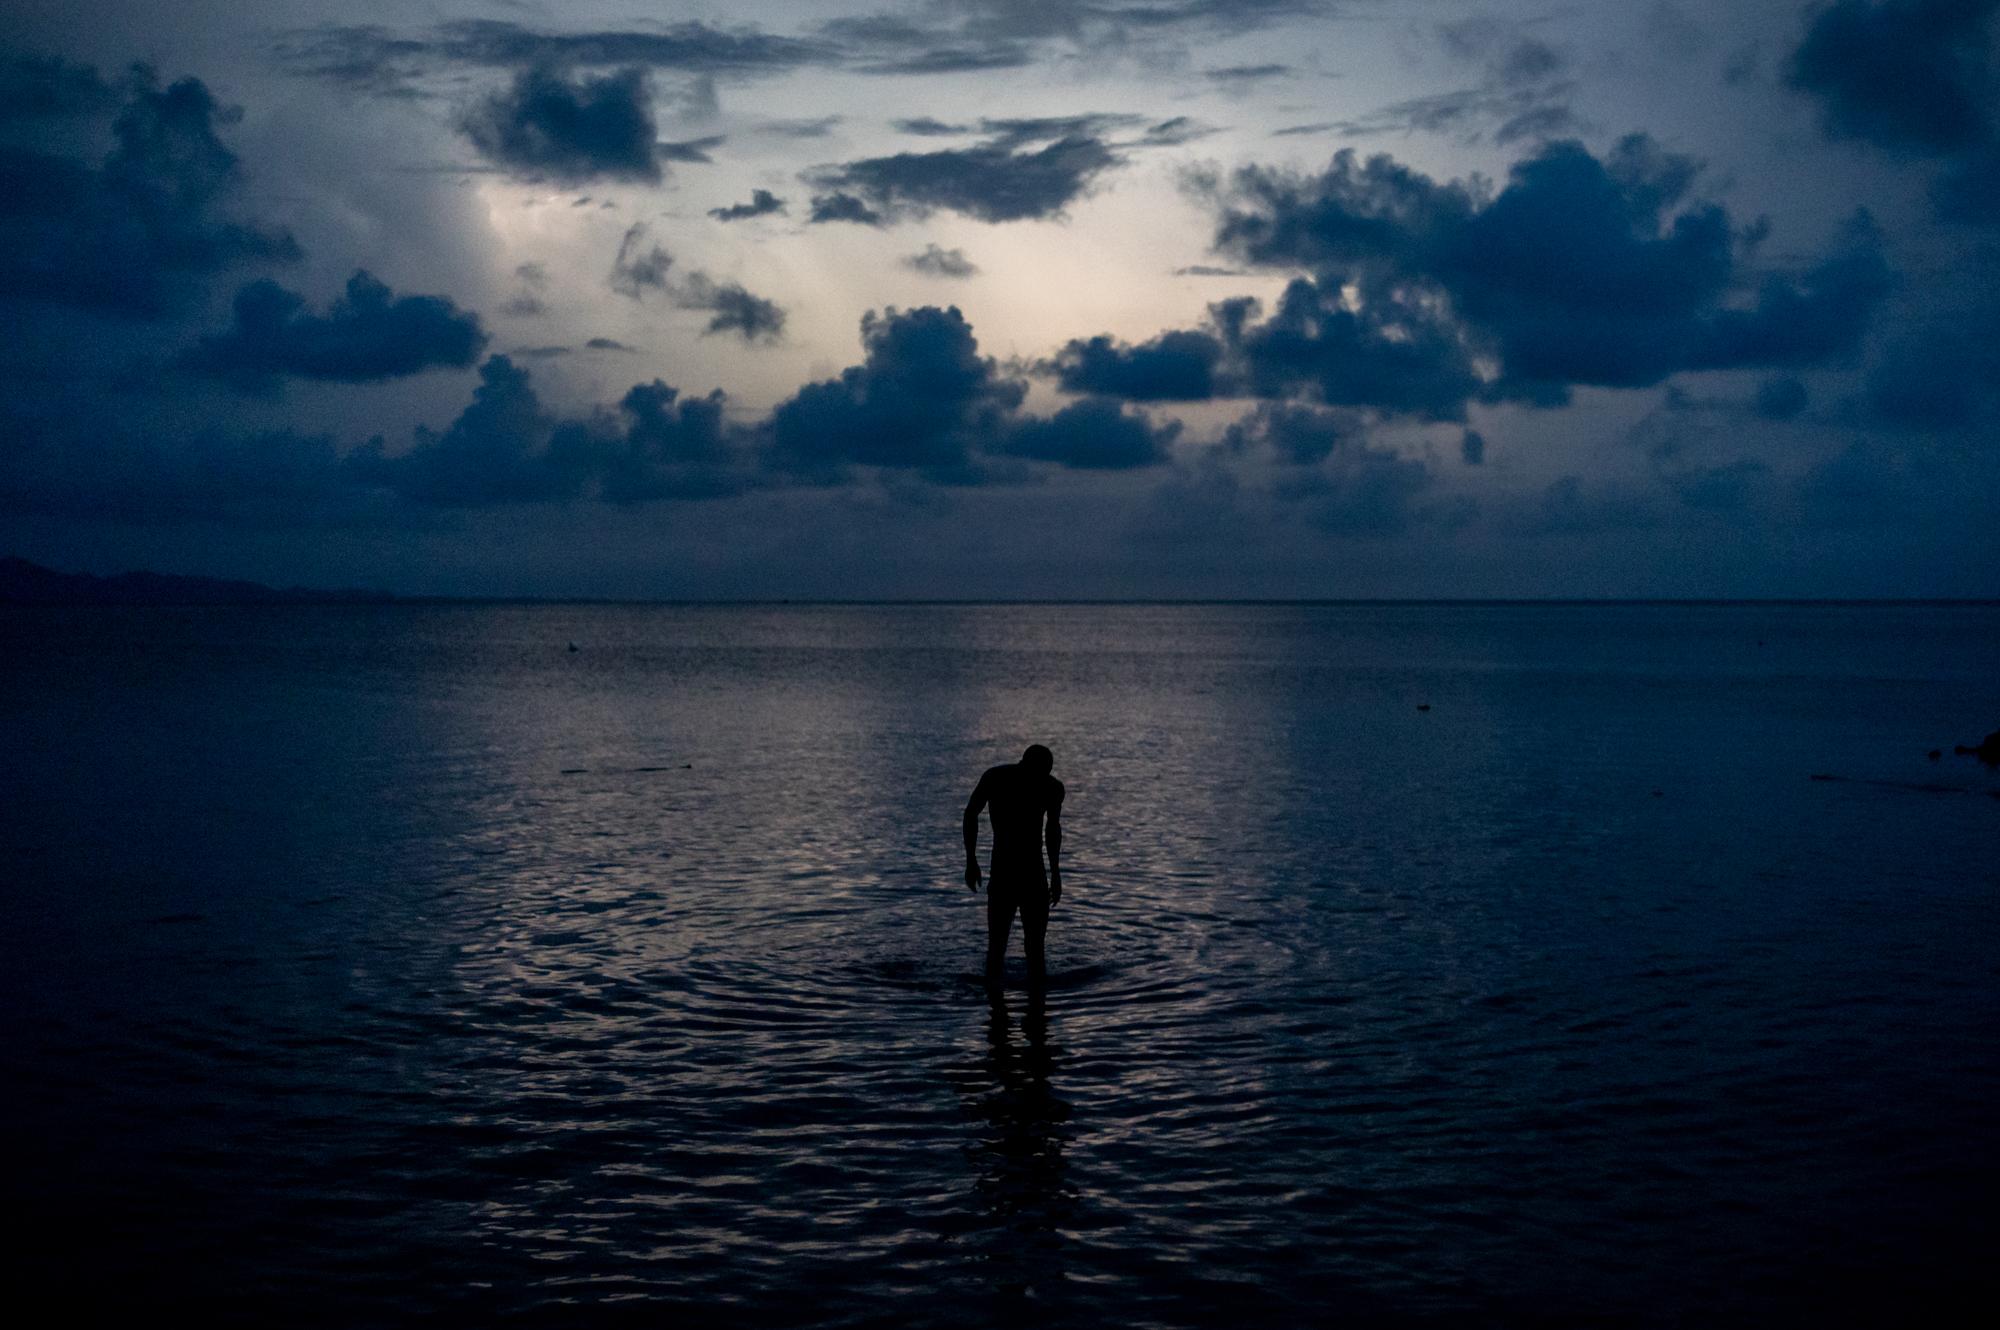 Inside The Derian Gap - A Haitian migrant wades into the waters of the Gulf of...